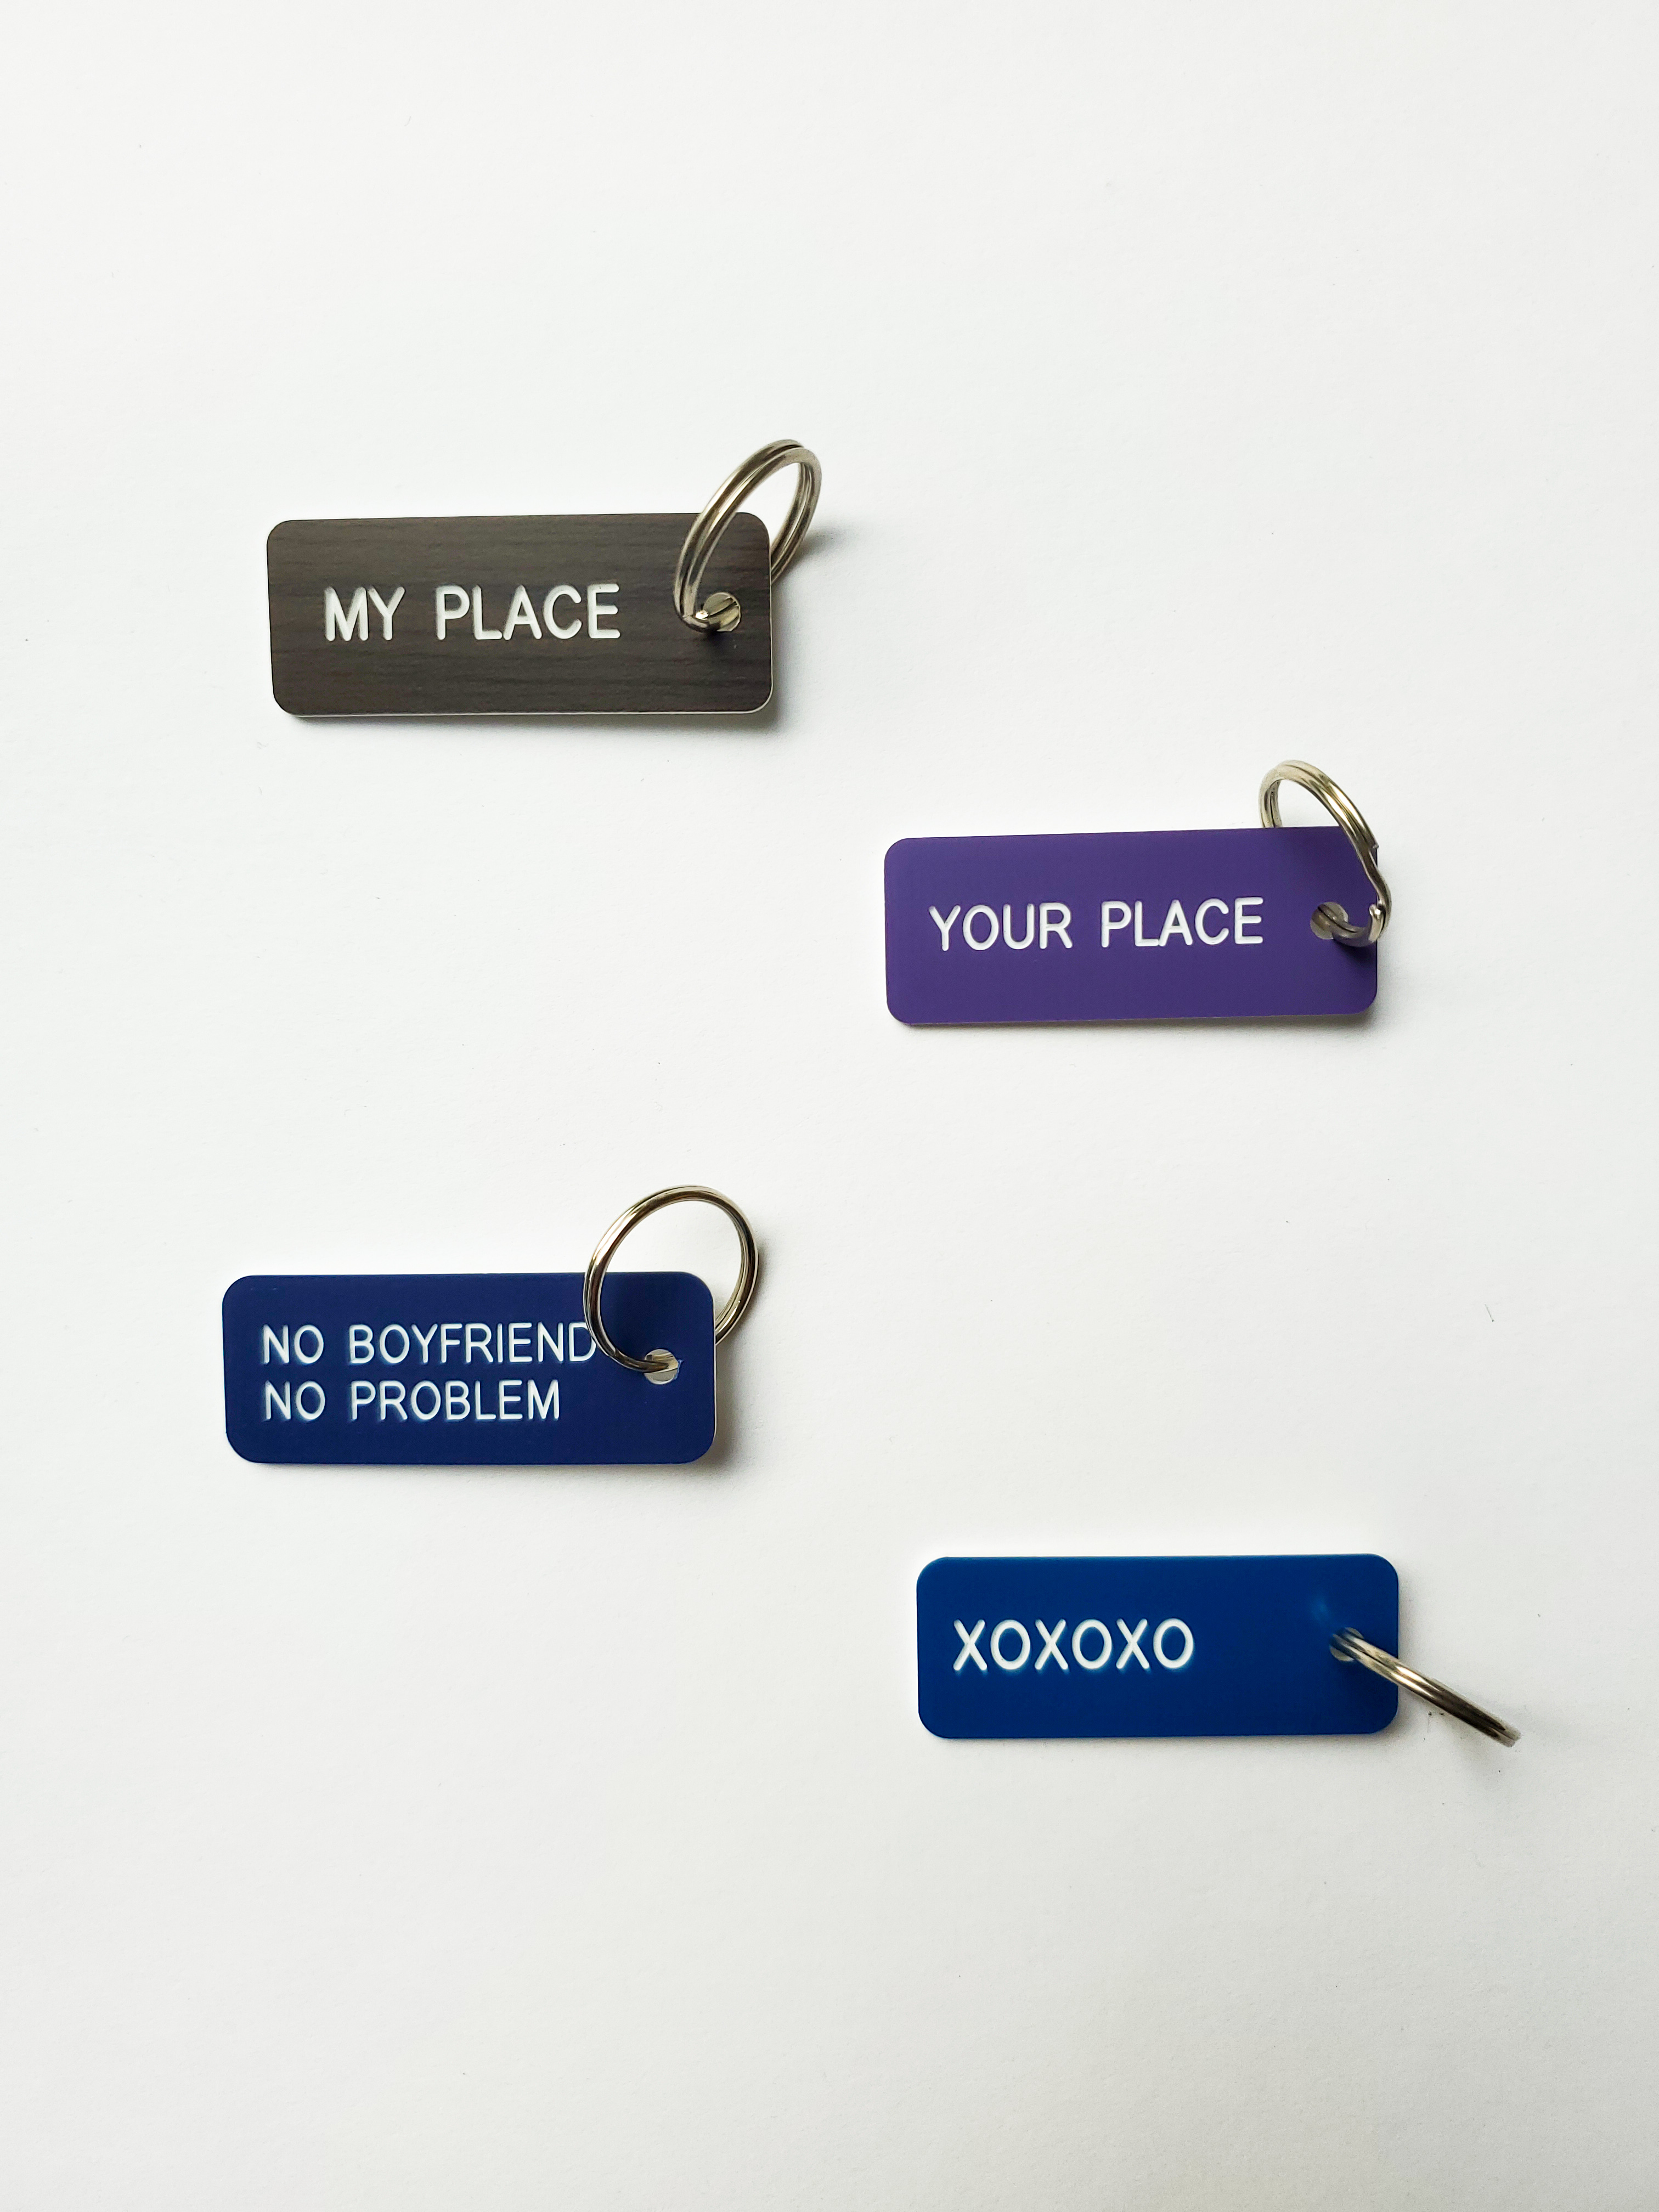 Four blue metallic keytags with key rings. From top to bottom, they state "My place," "Your place," "No boyfriend no problem," "XOXOXO"